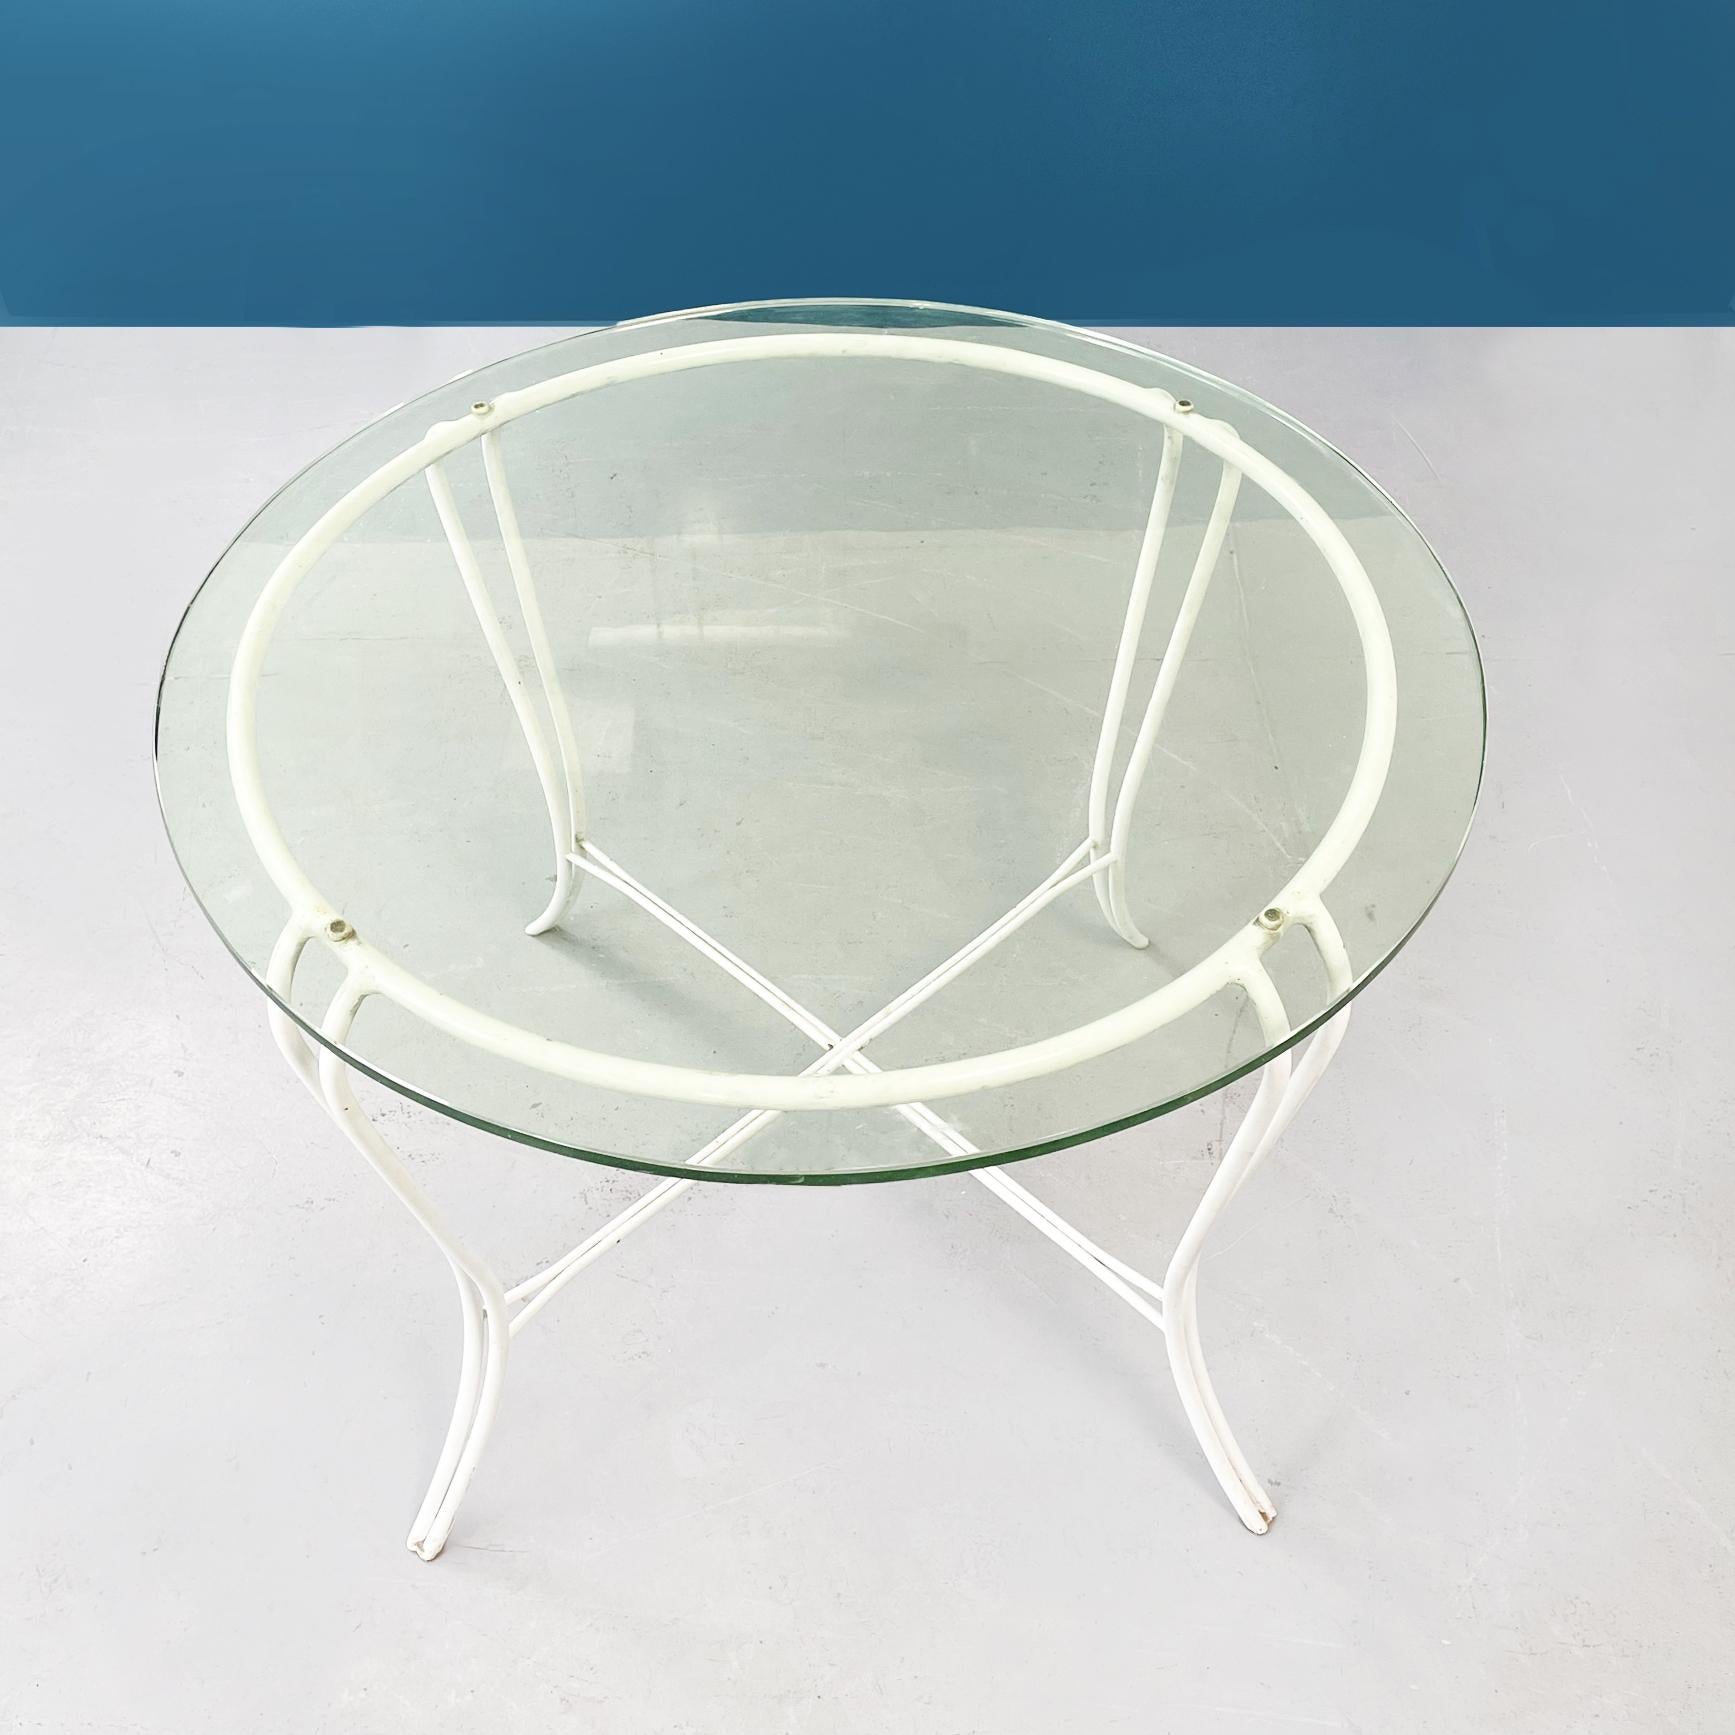 Italian Mid-Century Garden Chairs Table in White Iron, Glass and Fabric, 1960s For Sale 10